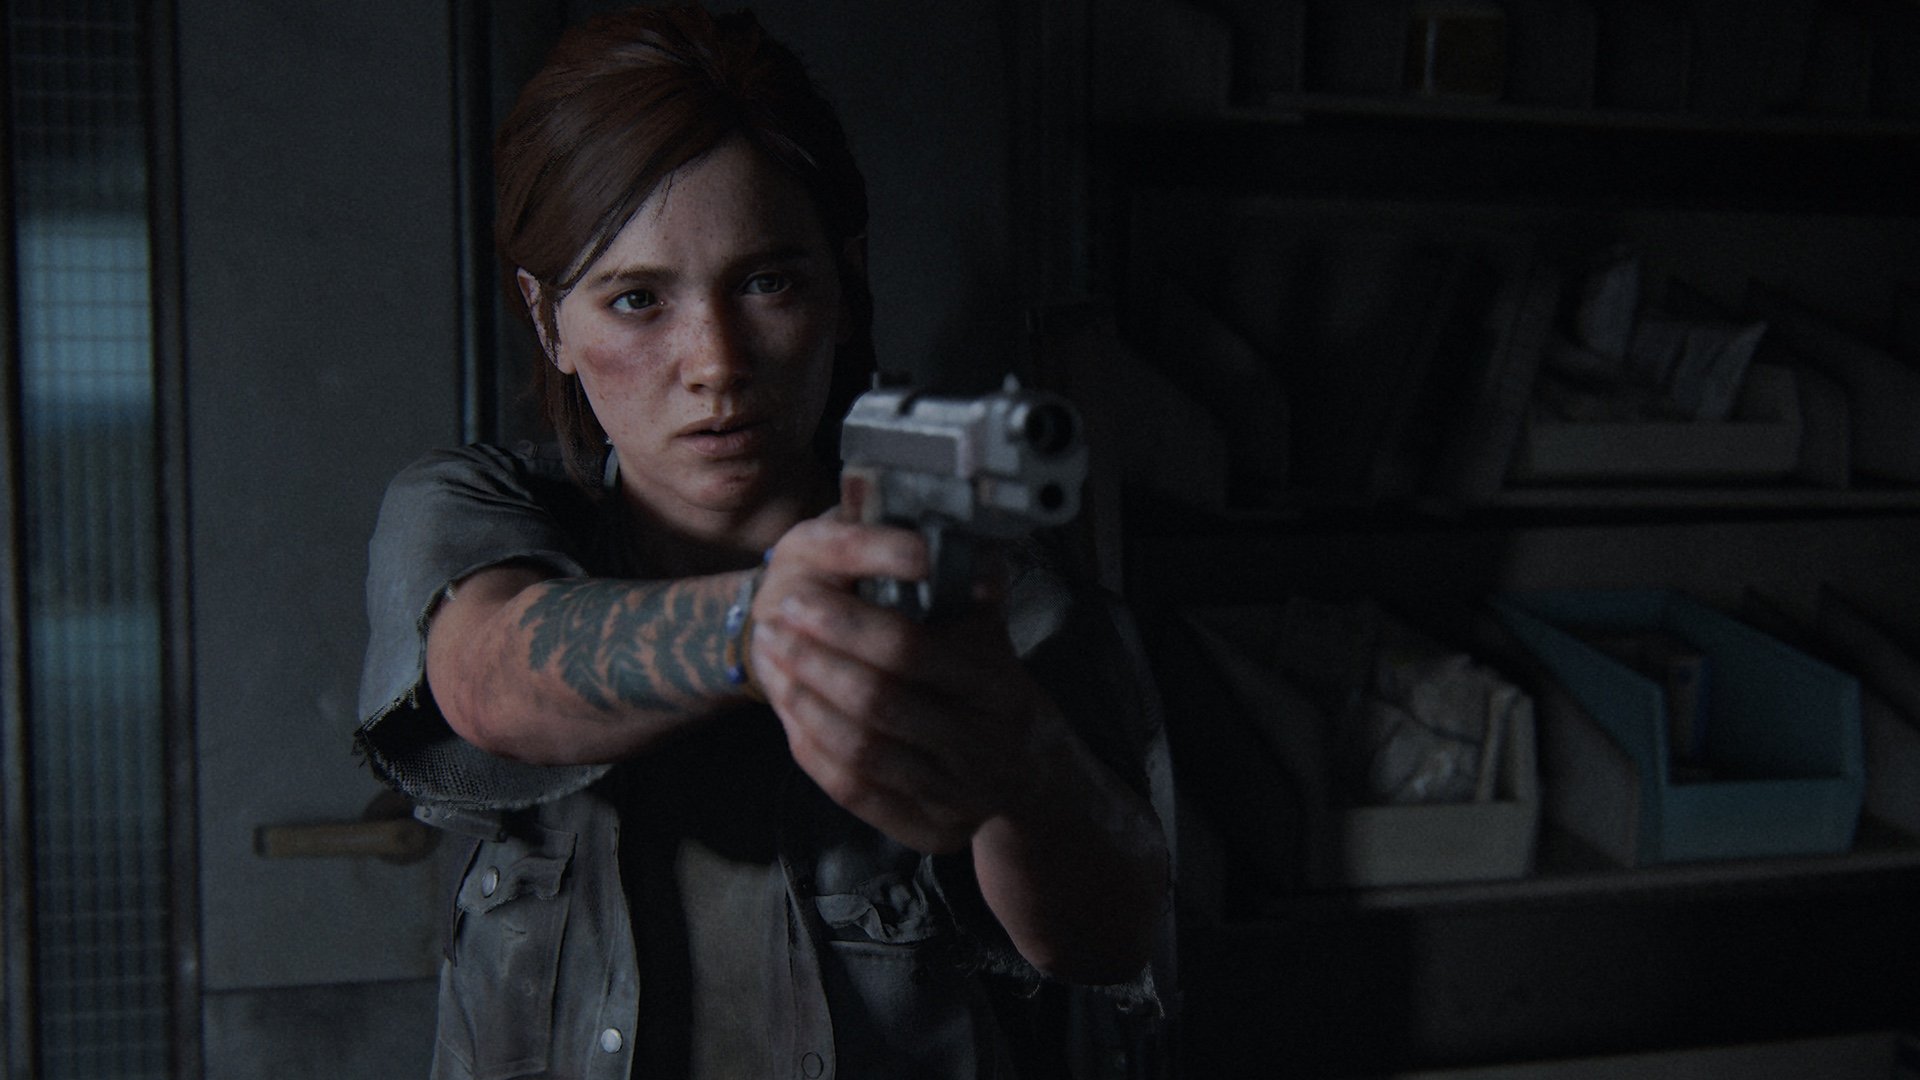 The Last of Us Part 2 writers have an outline for Part 3, but no plans to  make game for now